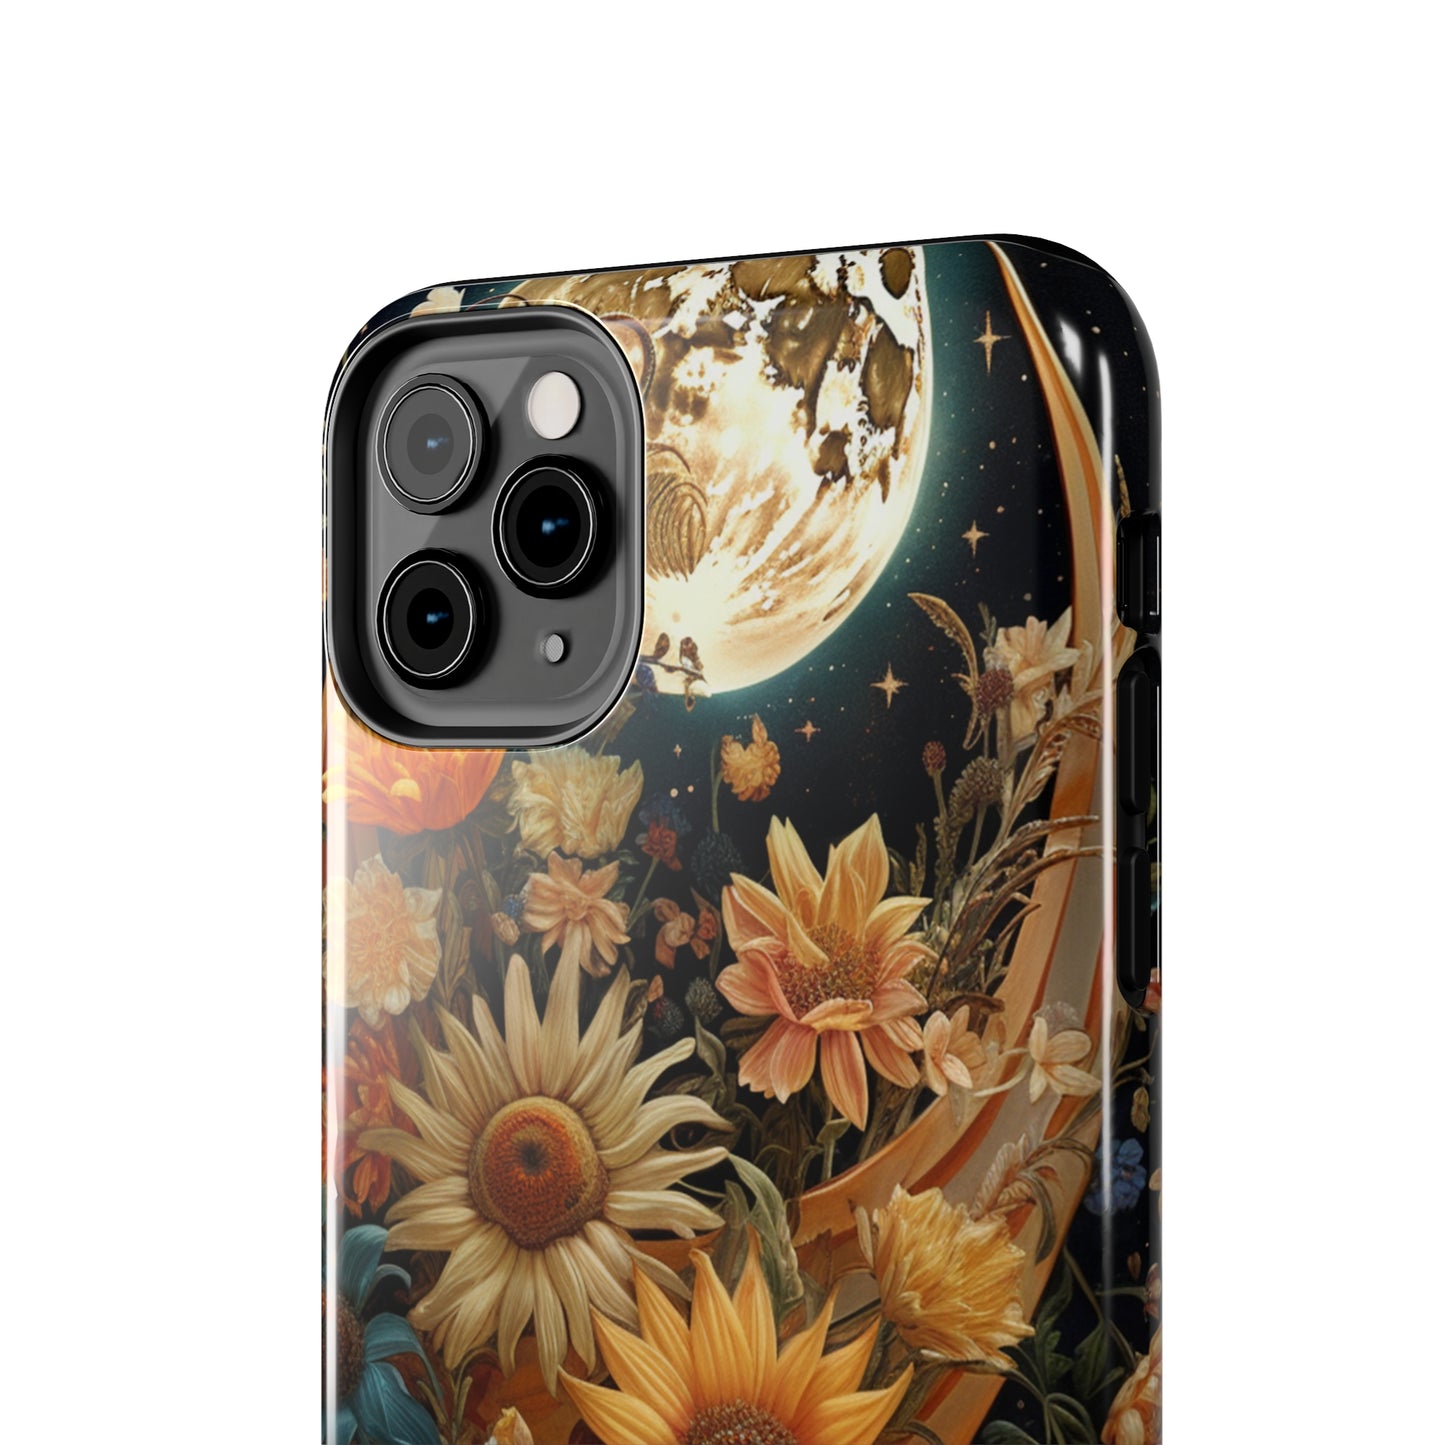 Celestial Charm: iPhone Case with Boho Cottagecore Fusion of Floral, Sun, Moon & Stars